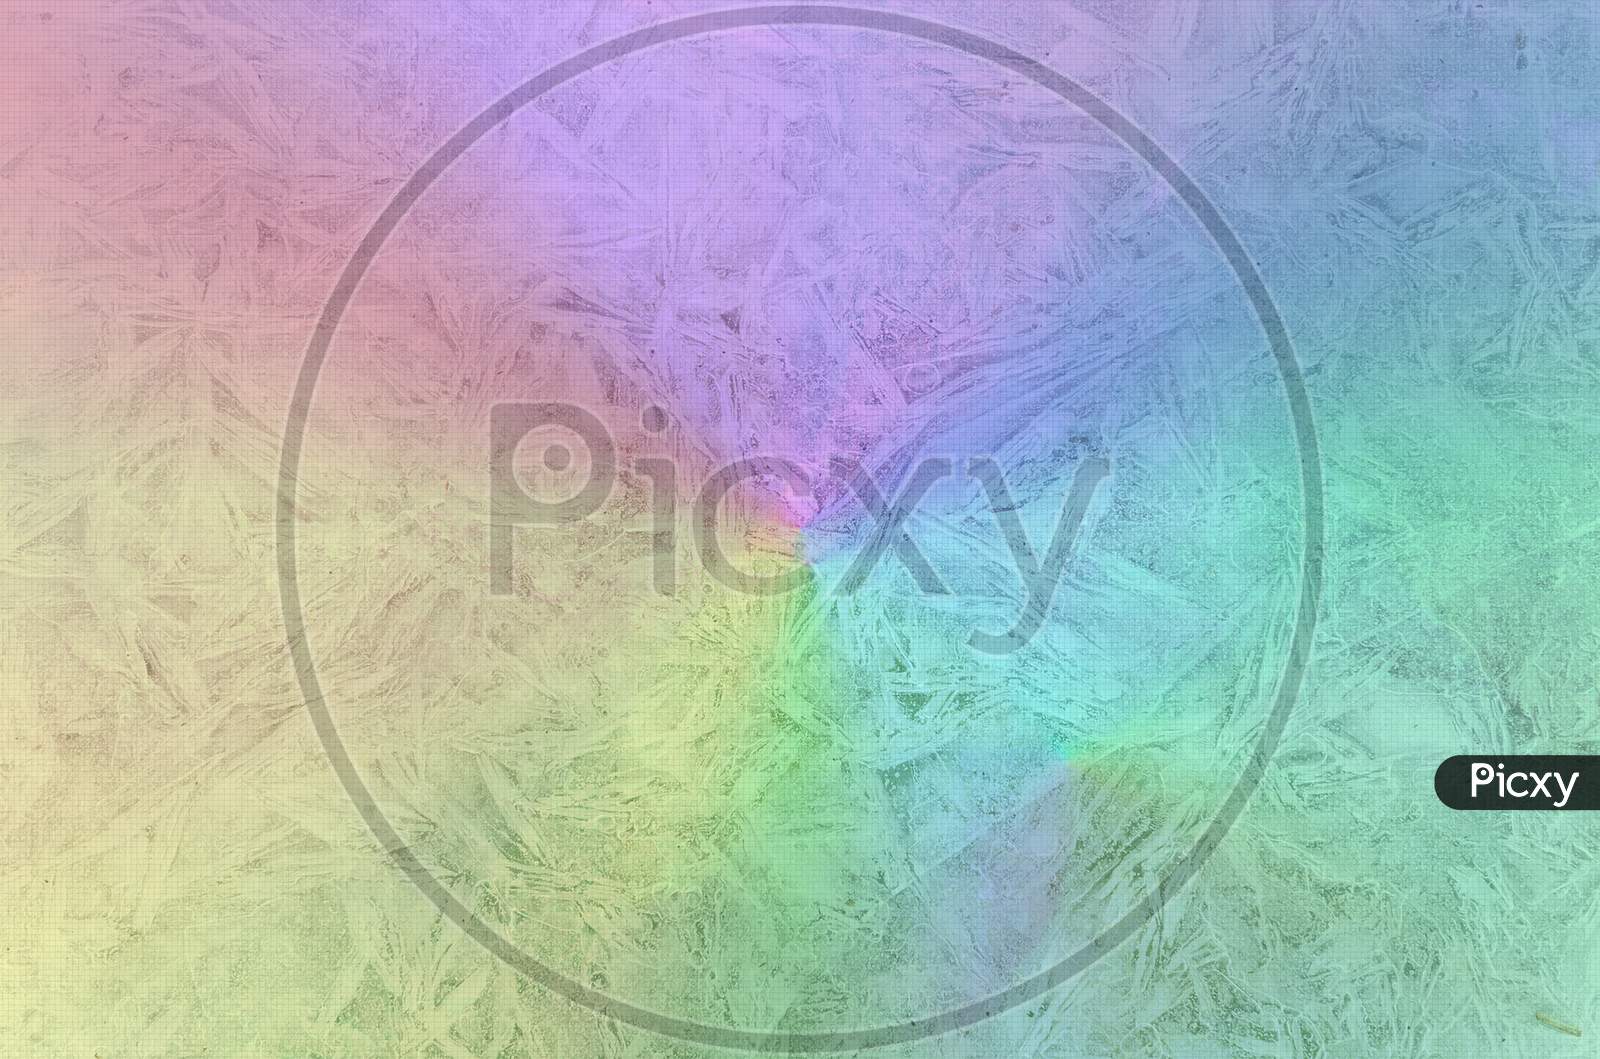 abstract background or texture